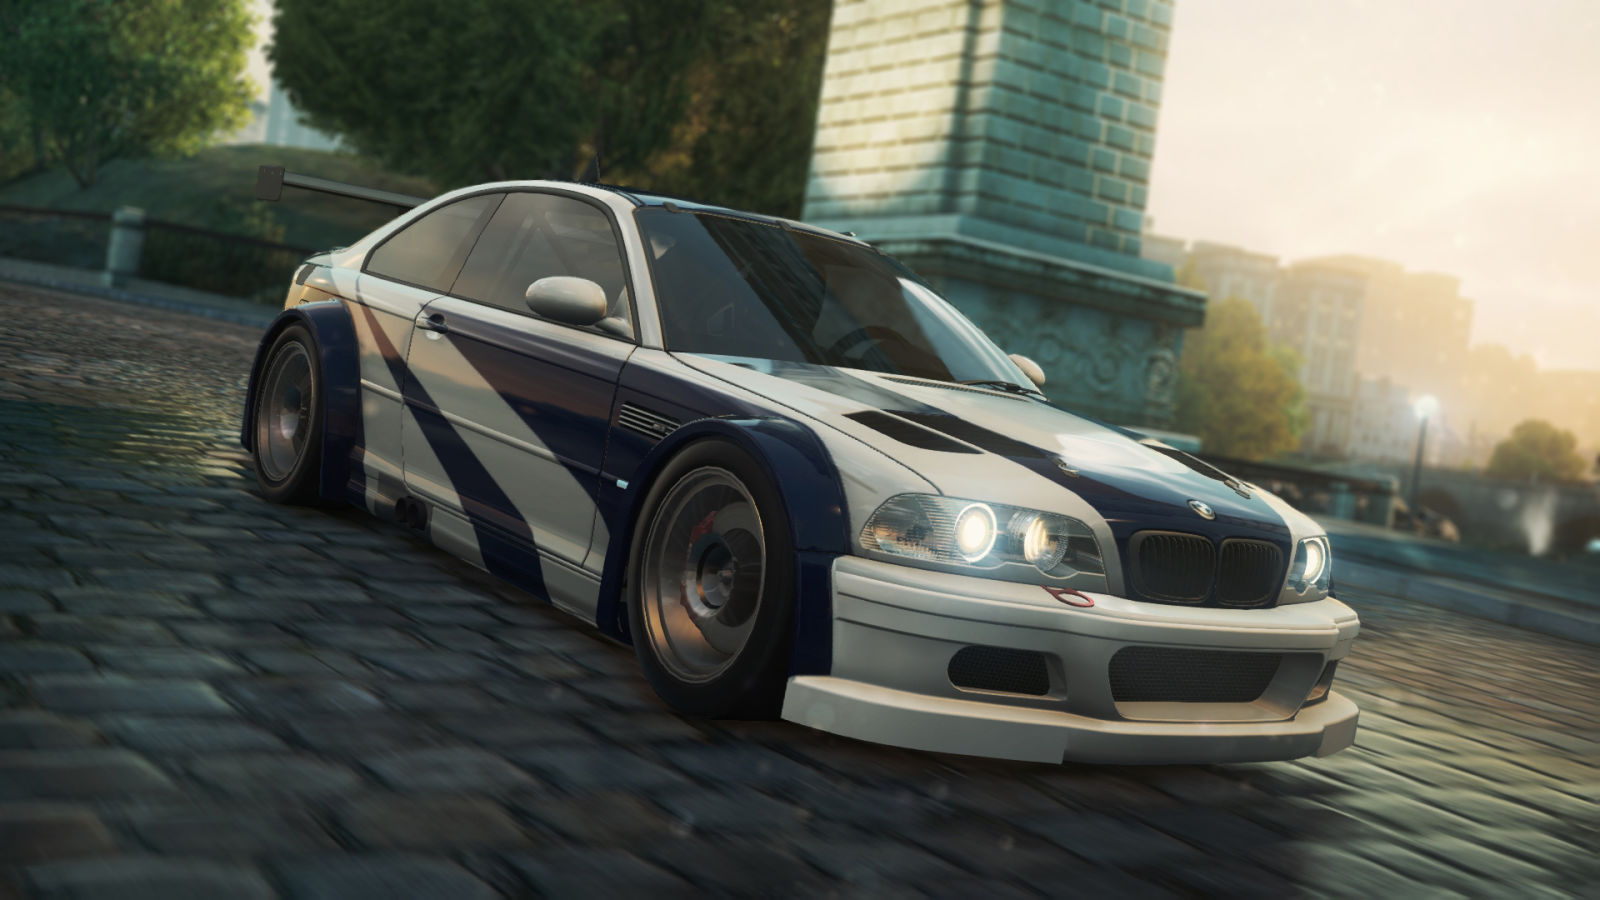 Photo from the NFS Wiki